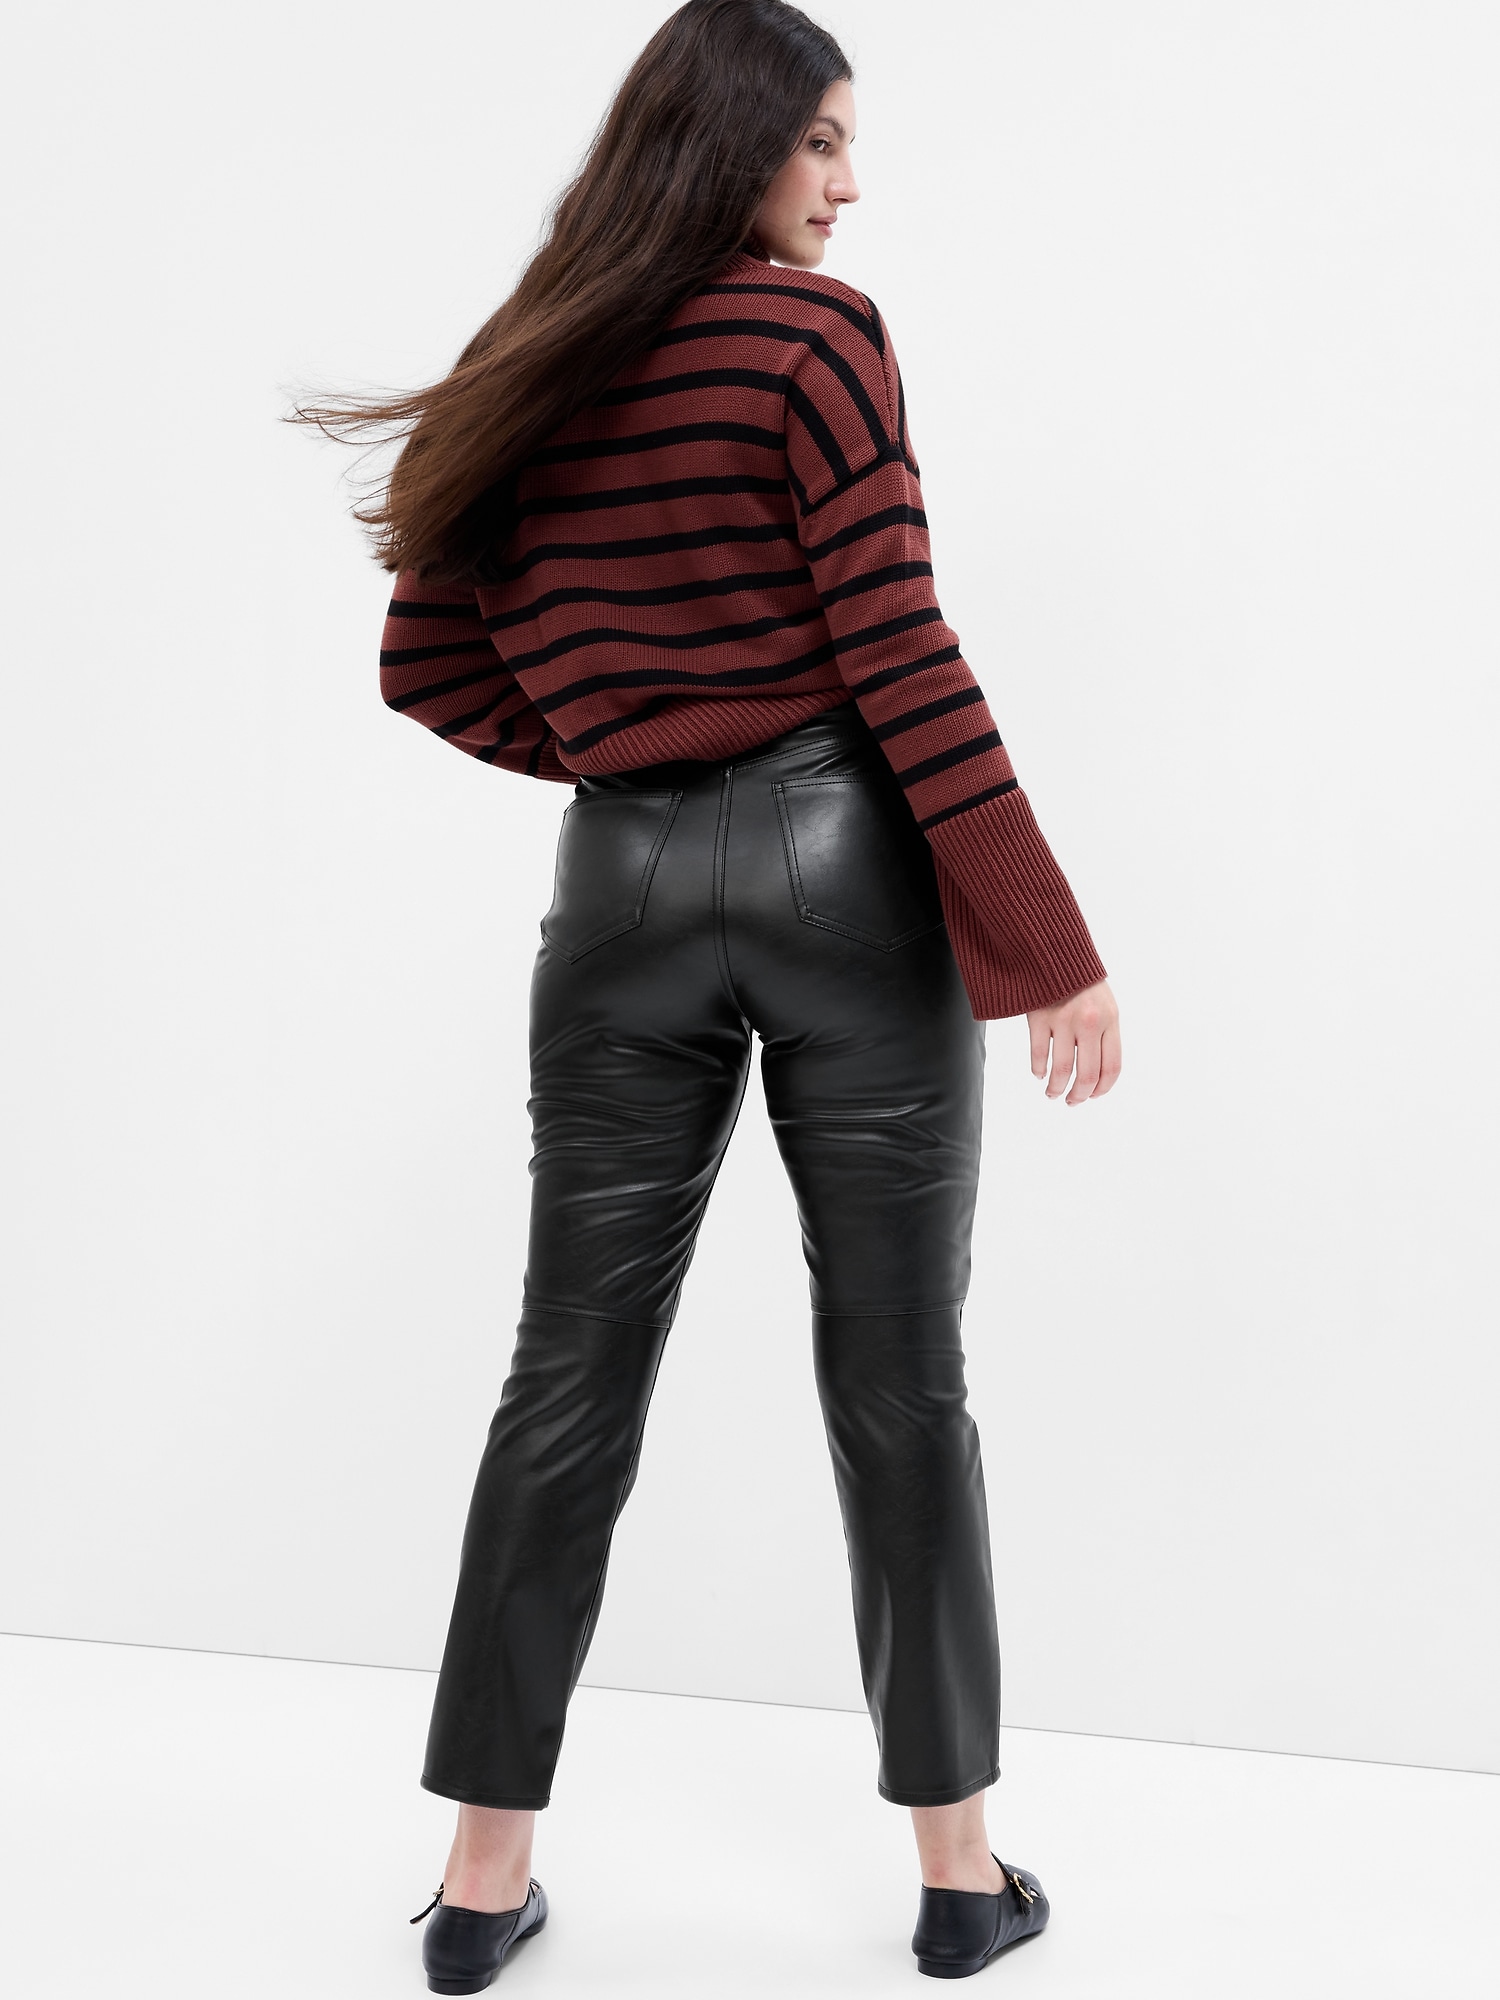 Buy Gap High Waisted Slim Faux-Leather Trousers from the Gap